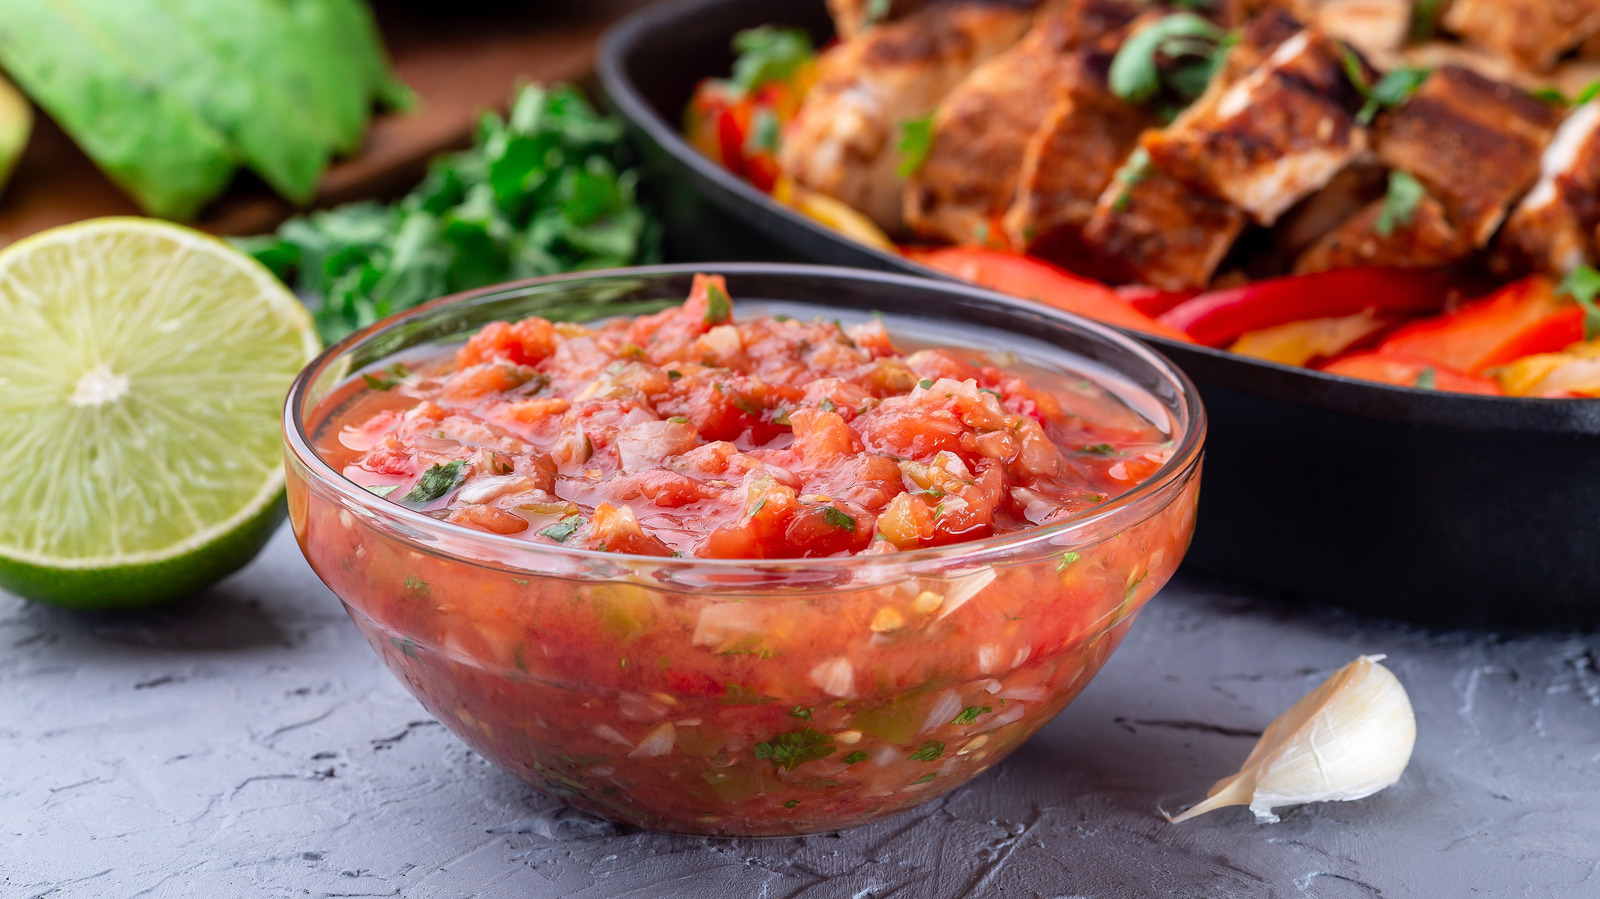 Picante Sauce Vs. Salsa: What's The Difference?